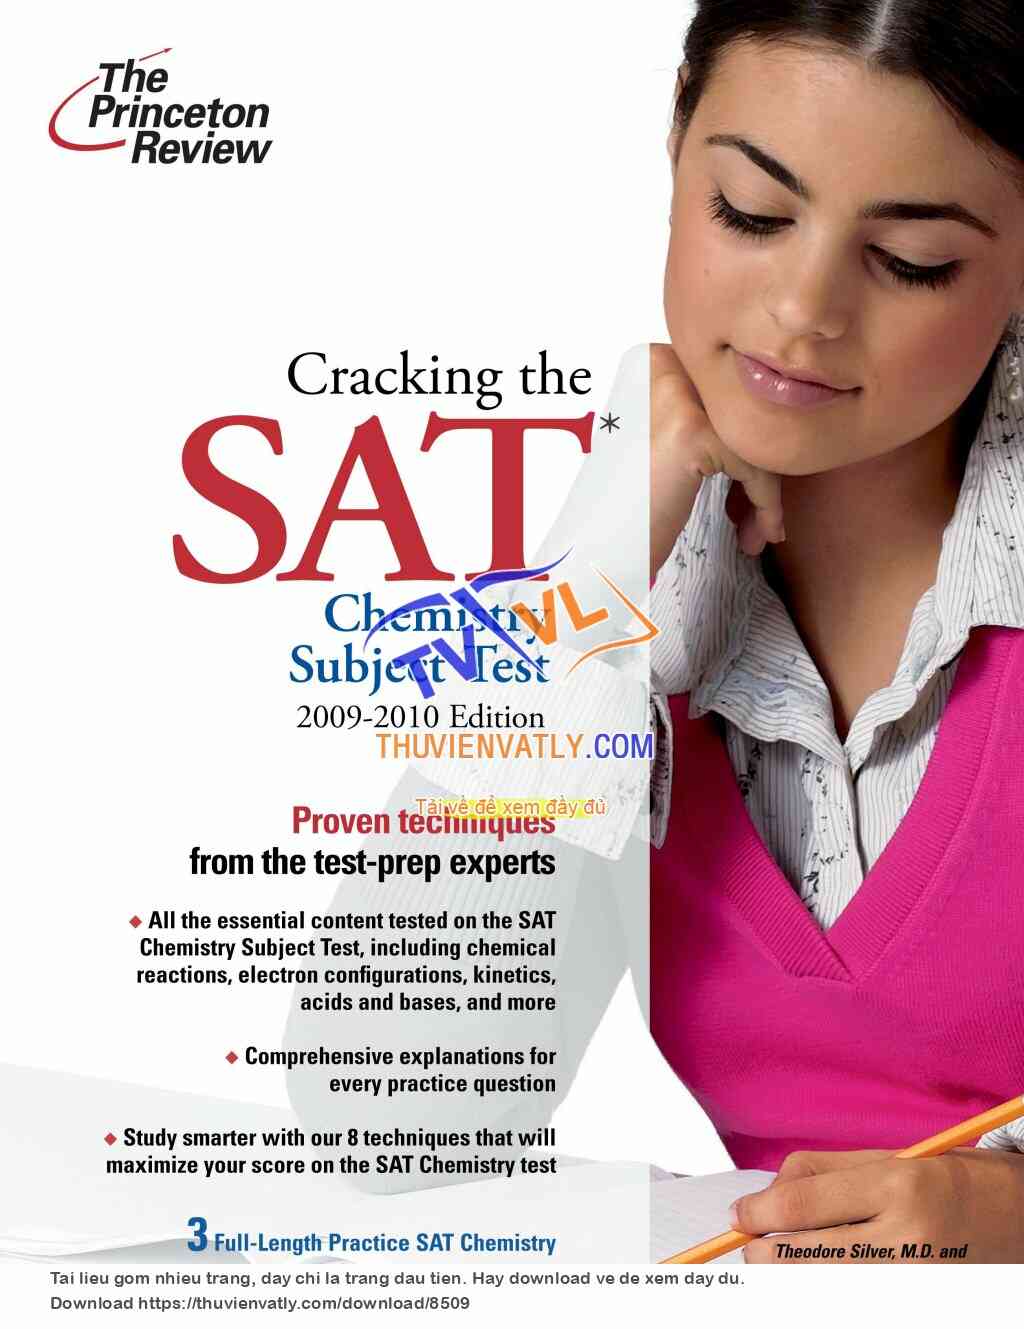 Cracking the SAT Chemistry 2009-2010 Edition